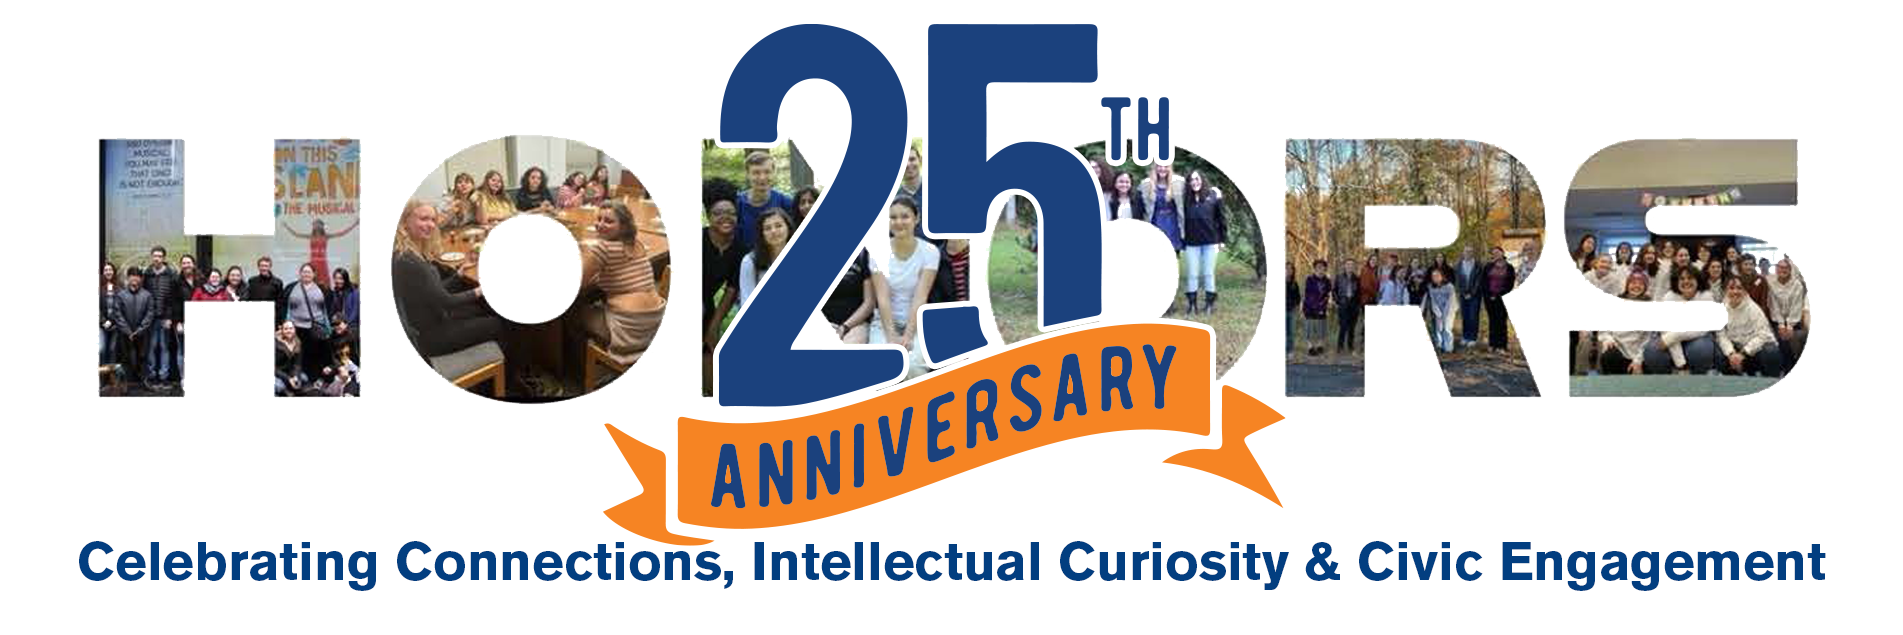 Honors 25th Anniversary - Celebrating Connections, Intellectual Curiosity & Civic Engagement